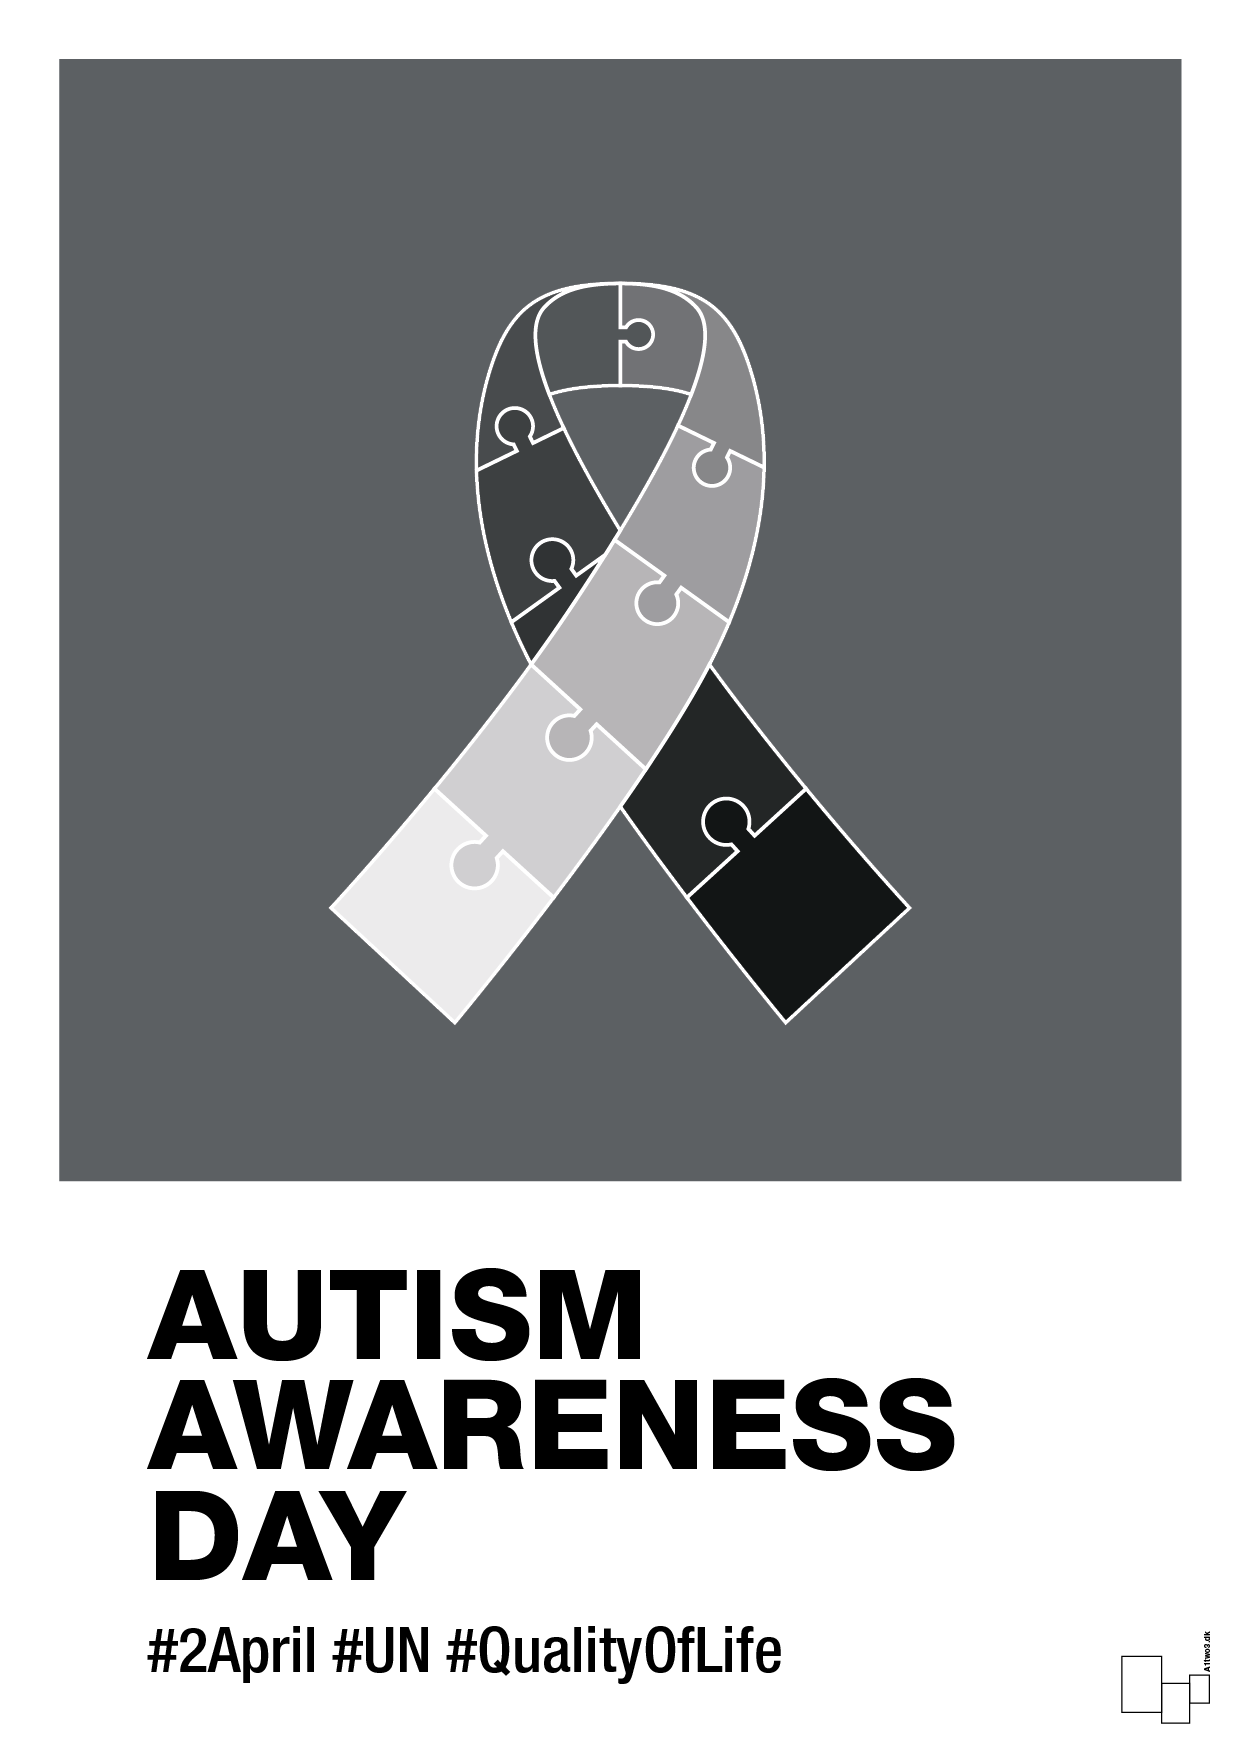 autism awareness day in monocolor - Plakat med Samfund i Graphic Charcoal